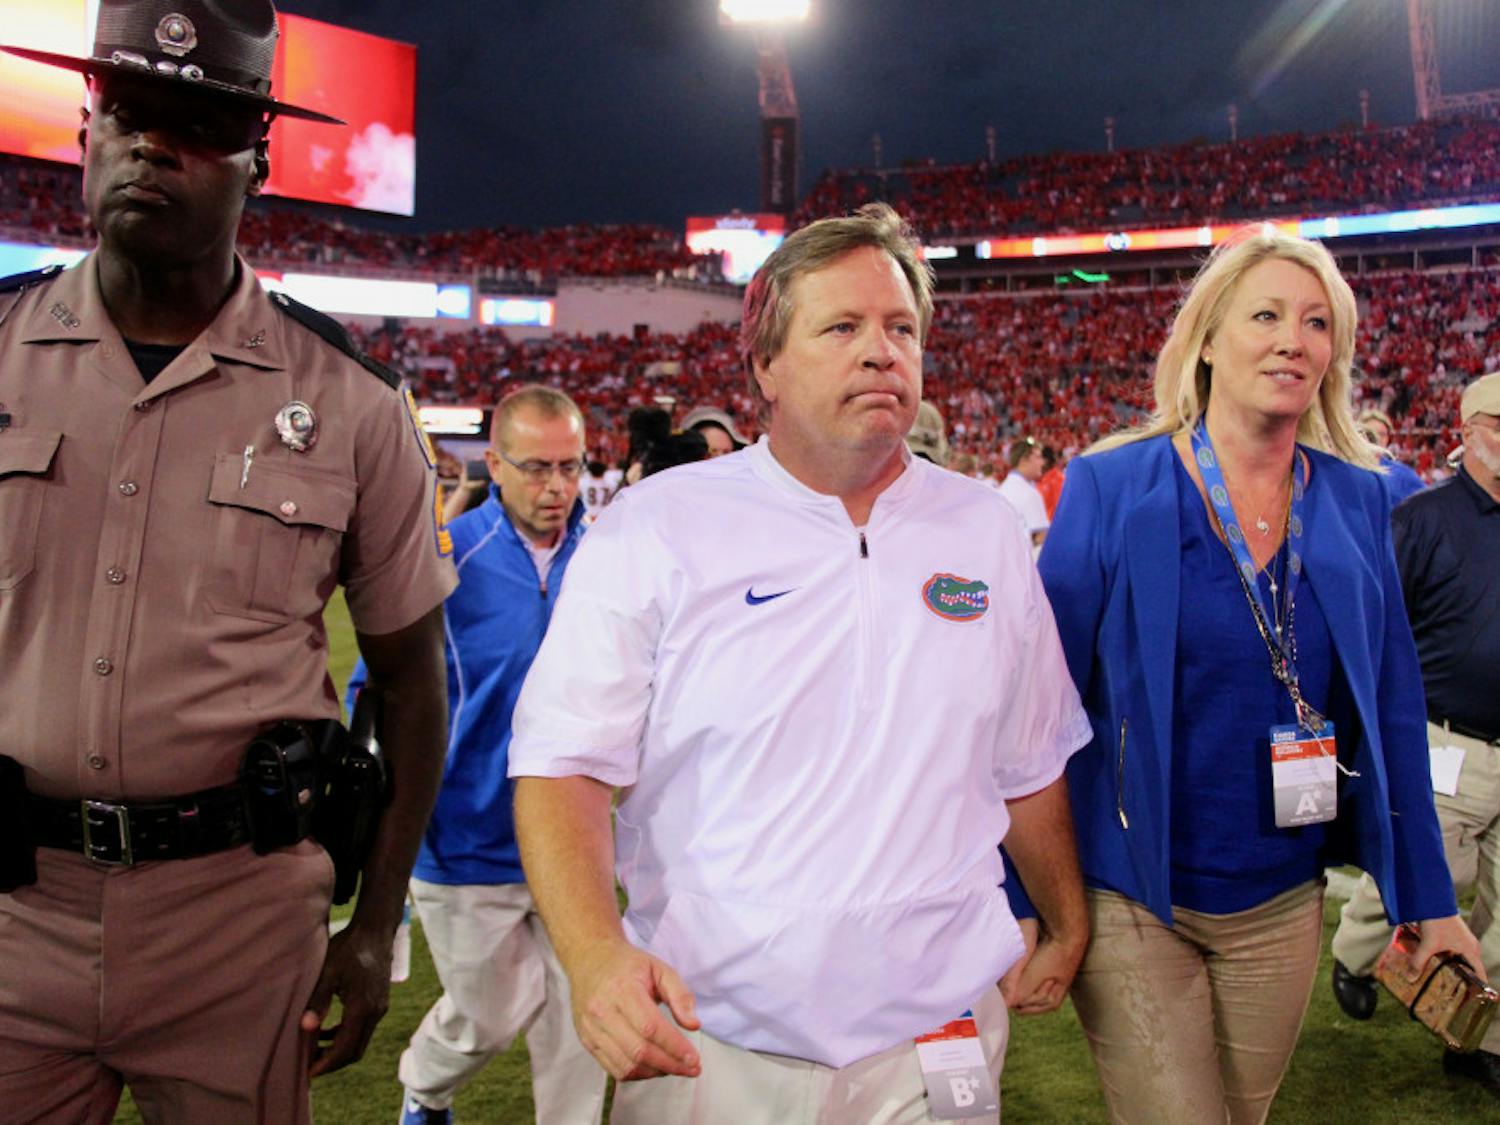 Jim McElwain walks off the field after Florida's 42-7 loss to Georgia on Saturday at EverBank Field in Jacksonville. On Sunday, it was confirmed that McElwain and the UAA mutually agreed to part ways.